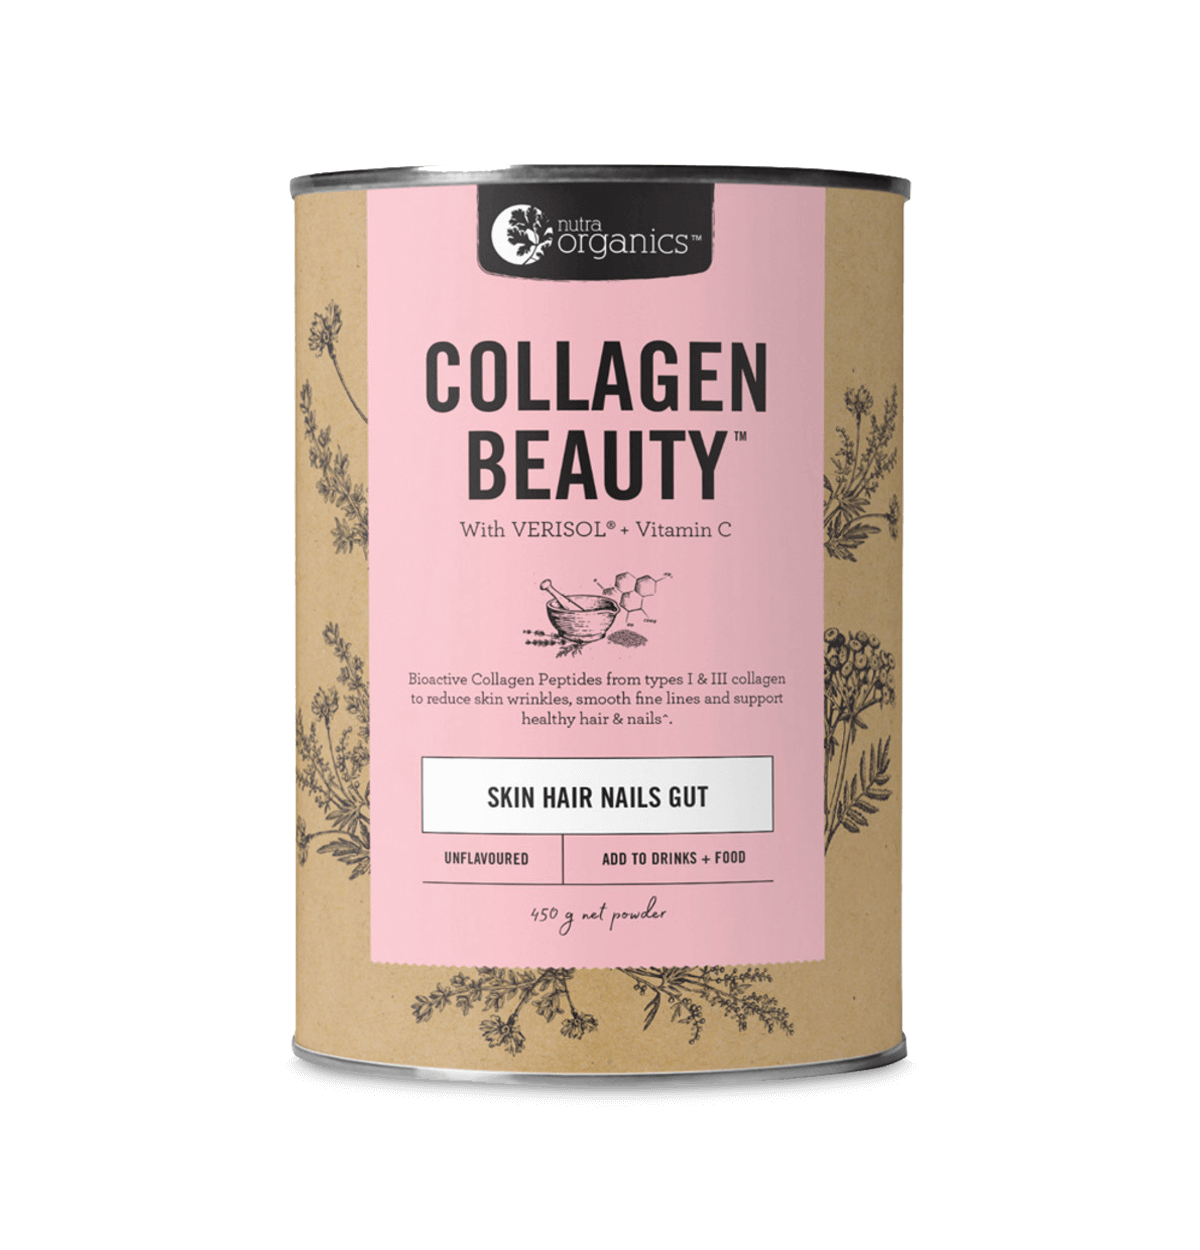 Image of Nutra Organics Collagen Beauty Skin Hair Nails 450g